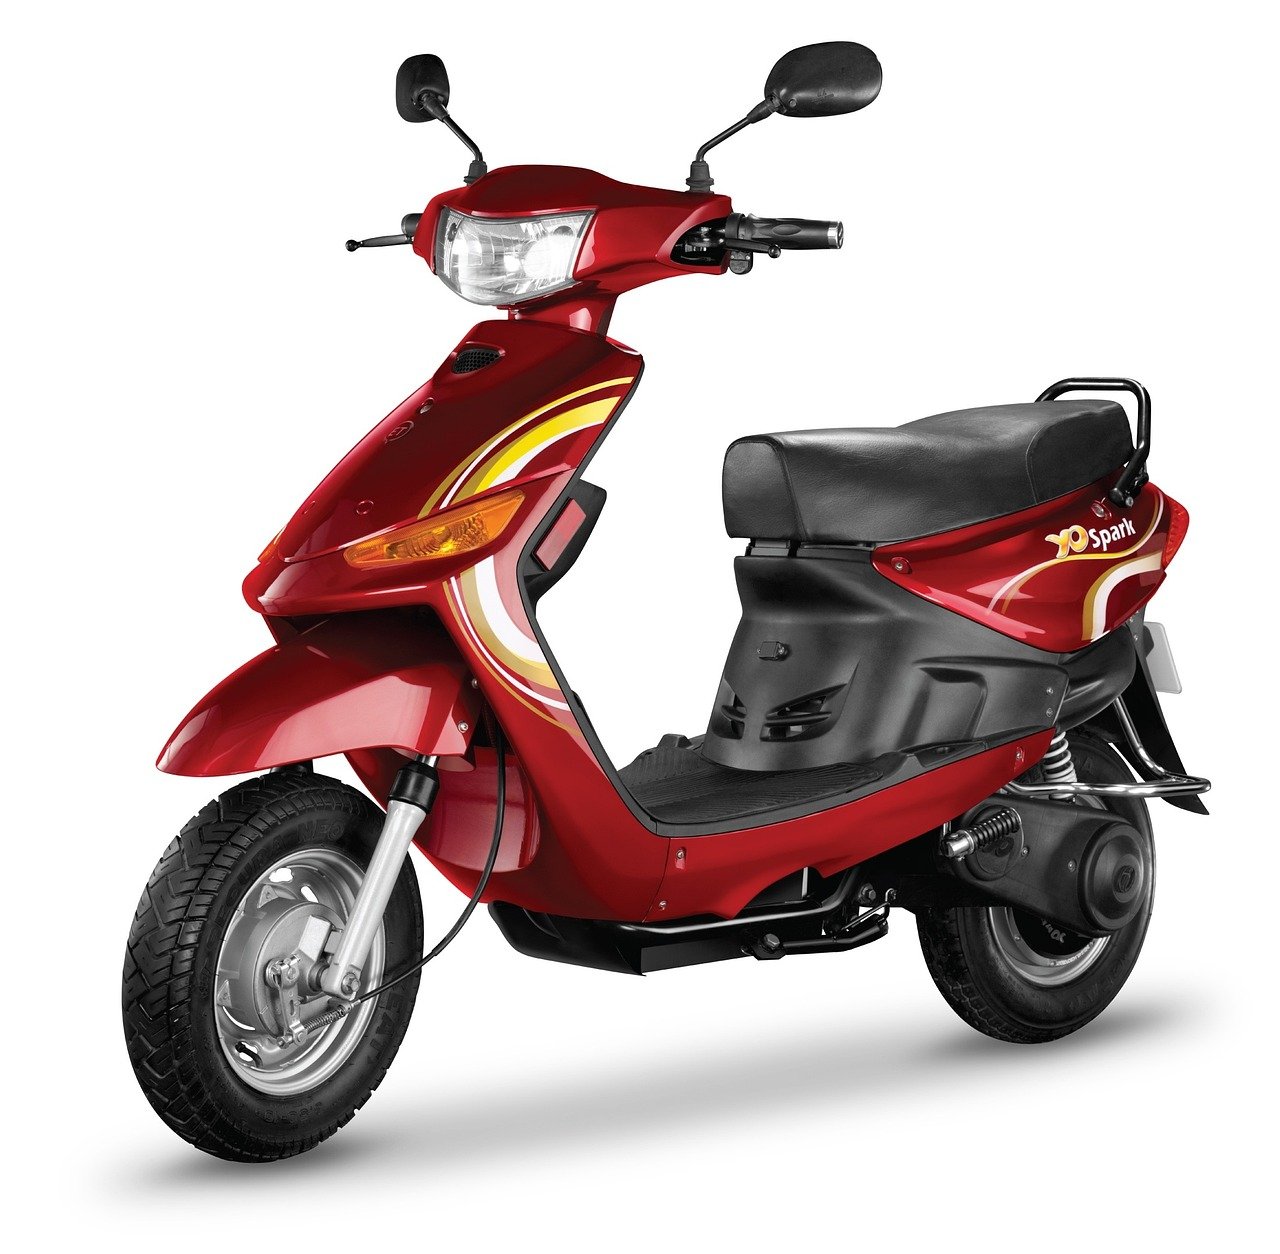 What Factors Should I Consider When Choosing The Motor Power Of My Electric Scooter?